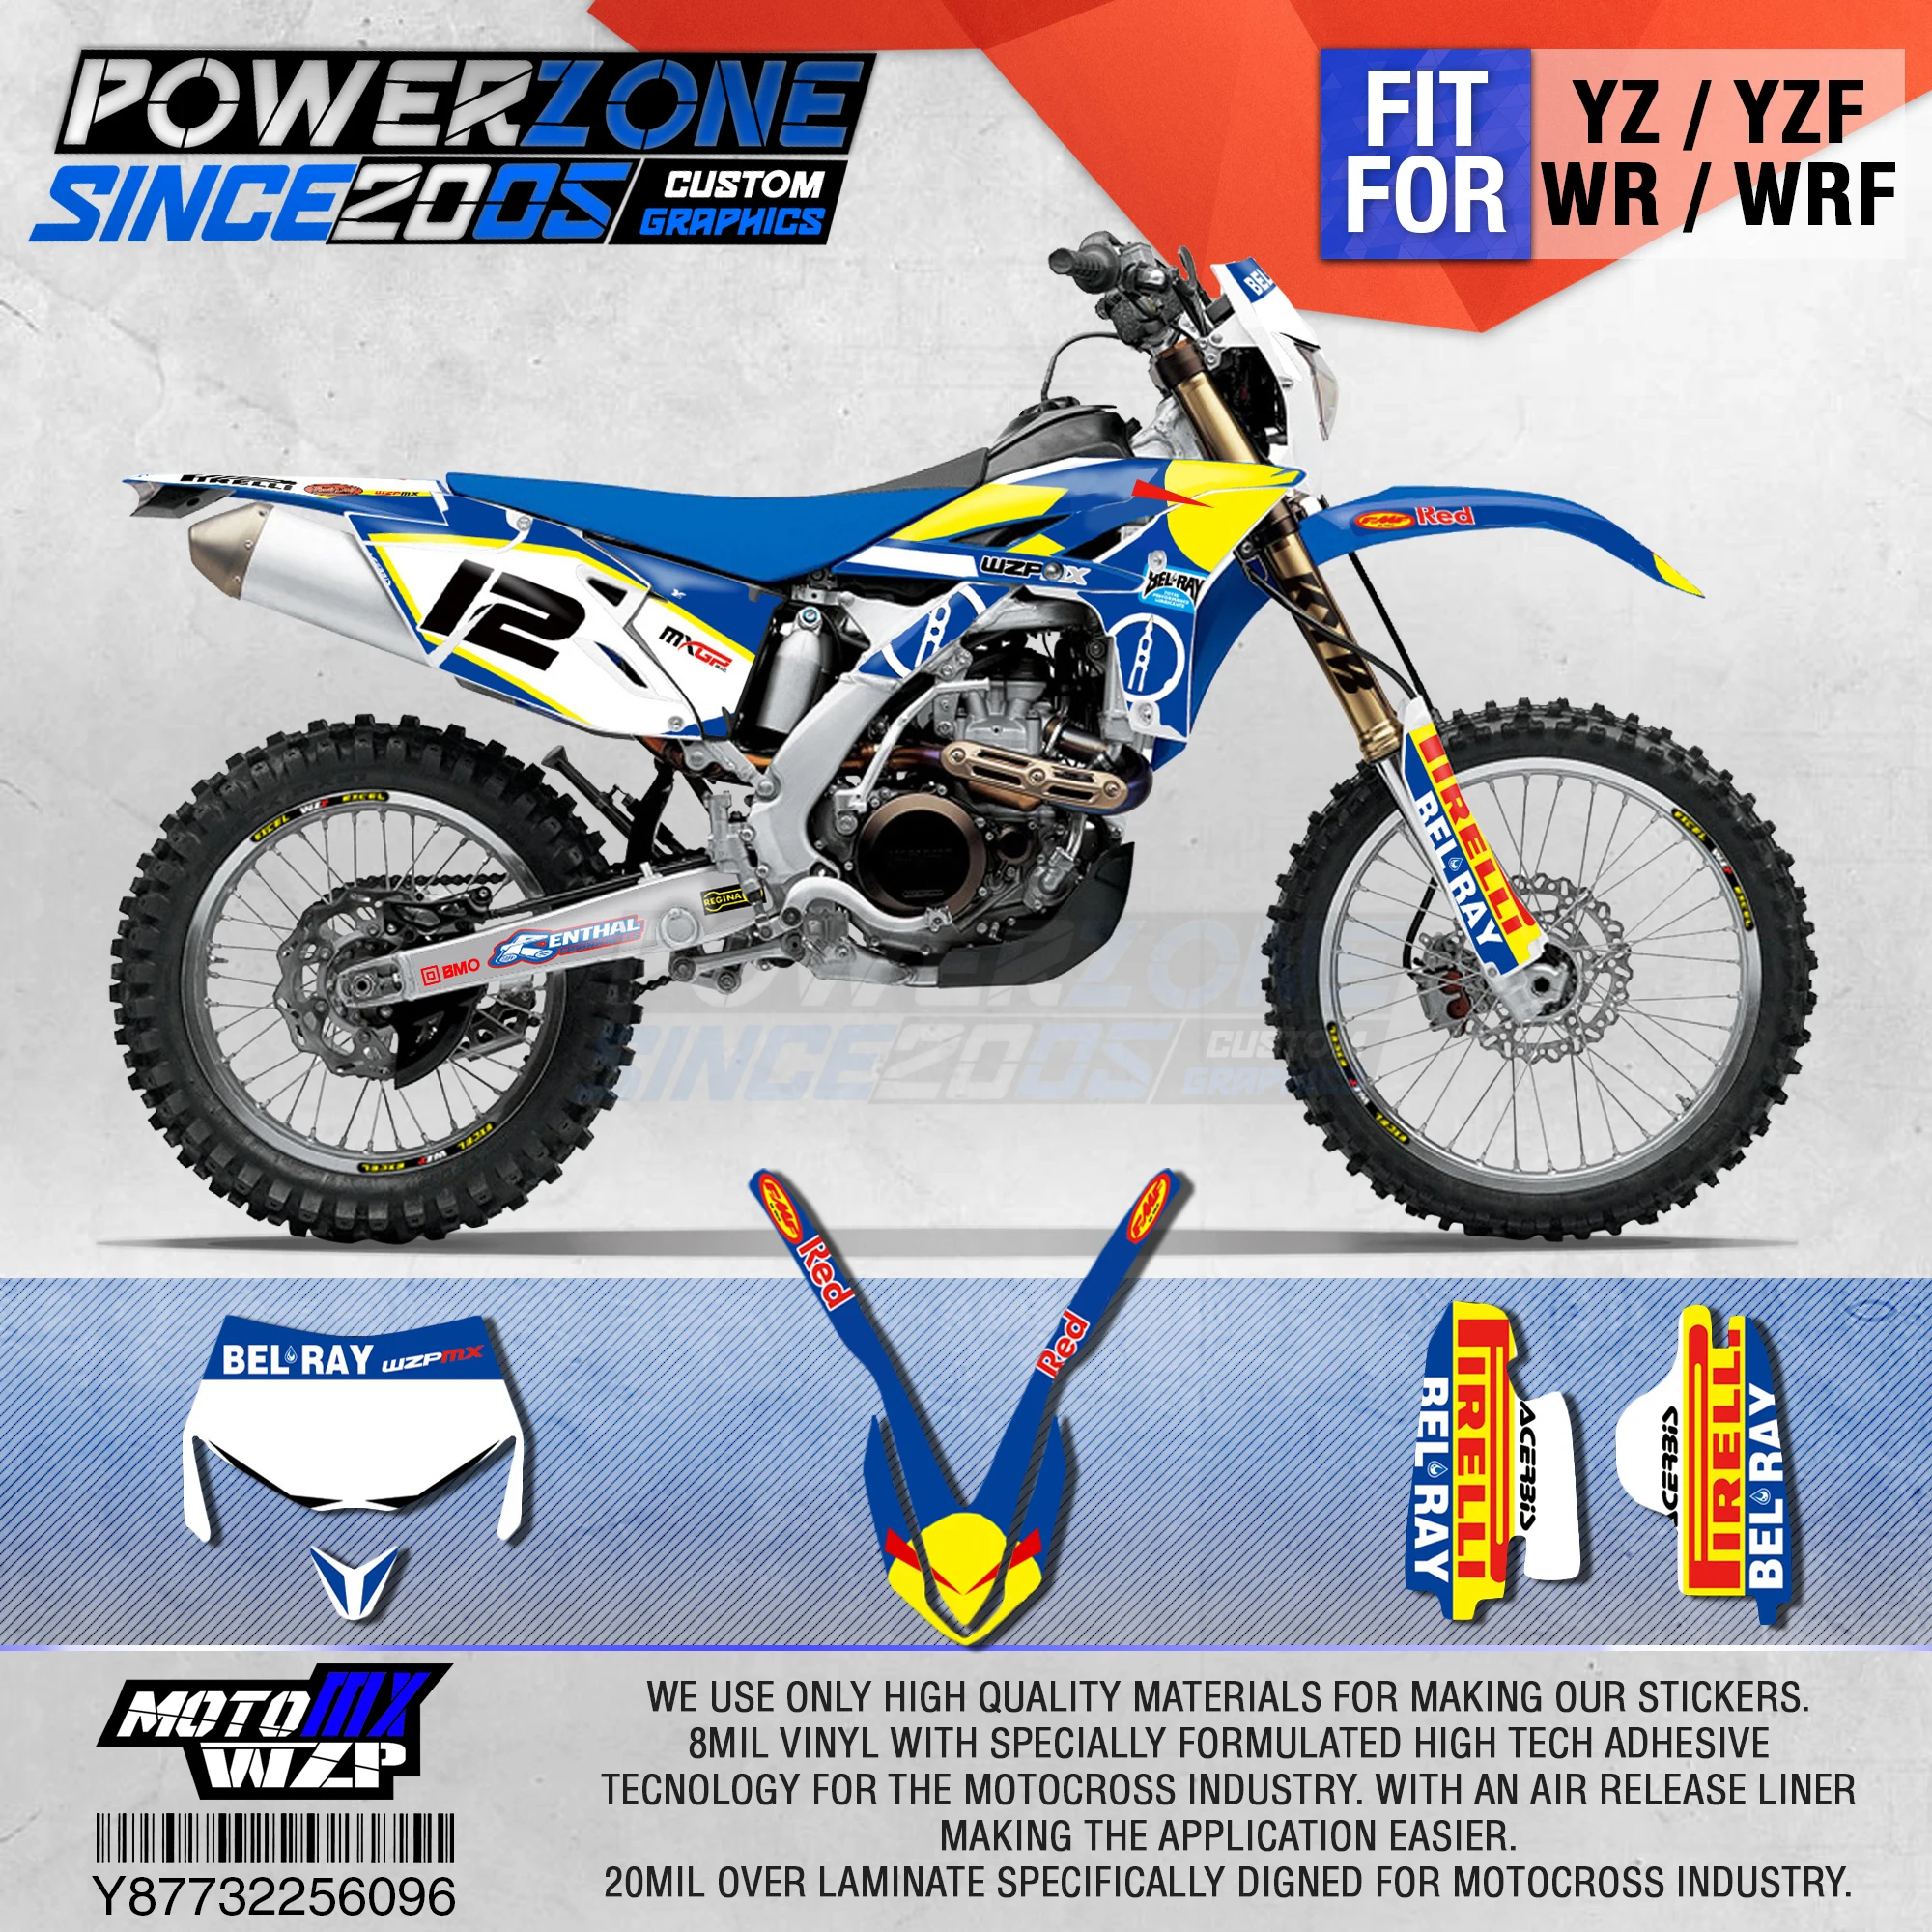 

PowerZone Customized Team Graphics Backgrounds Decals 3M Custom Stickers For YAMAHA YZF250 2010-2013 WR450F 2012-2015 YZ WRF 096